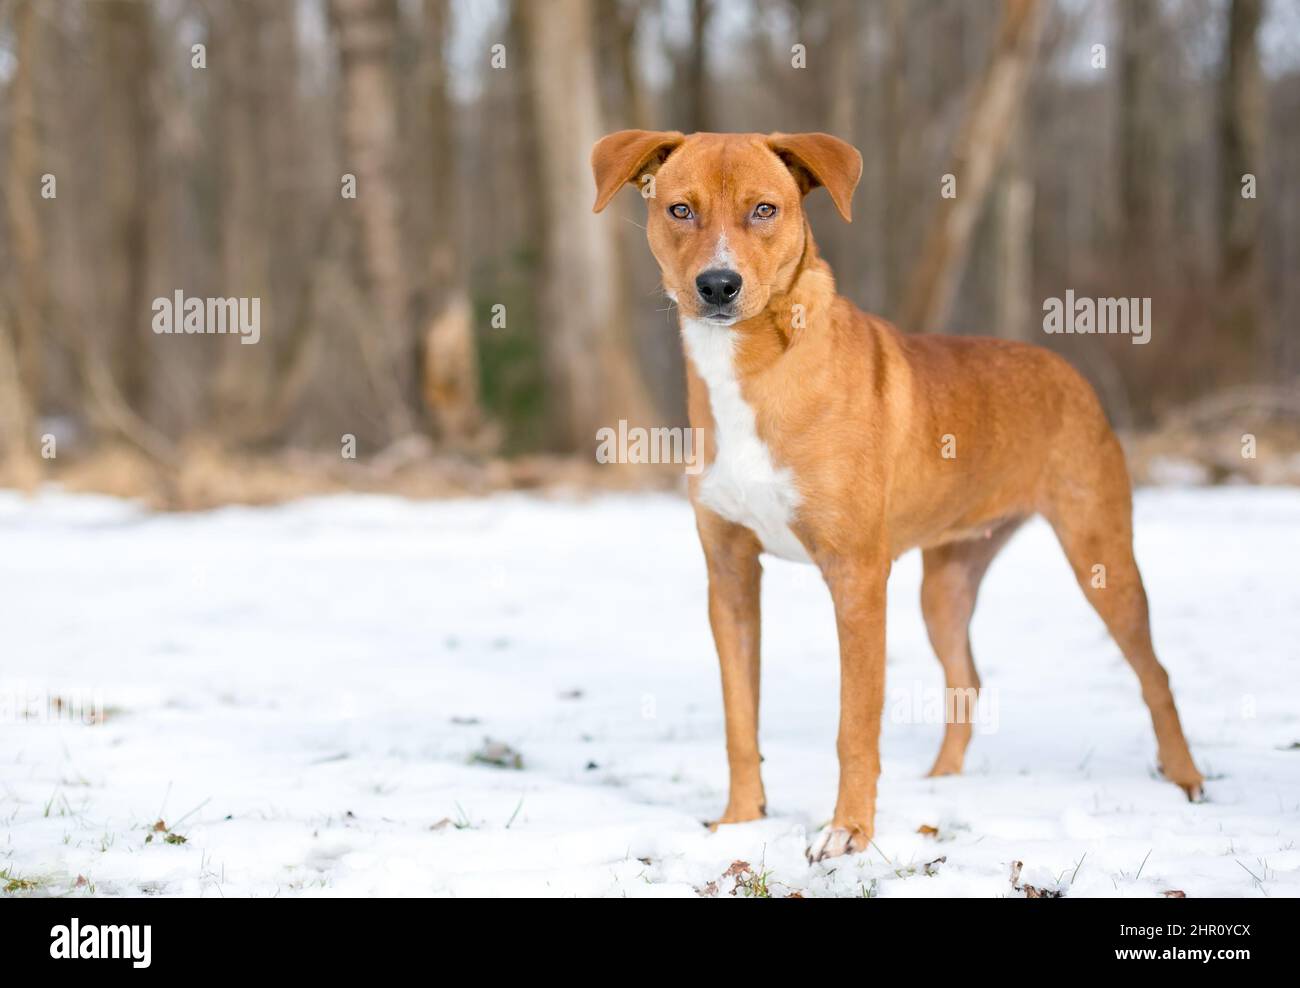 A young Terrier mixed breed dog with floppy ears standing outdoors in the snow Stock Photo